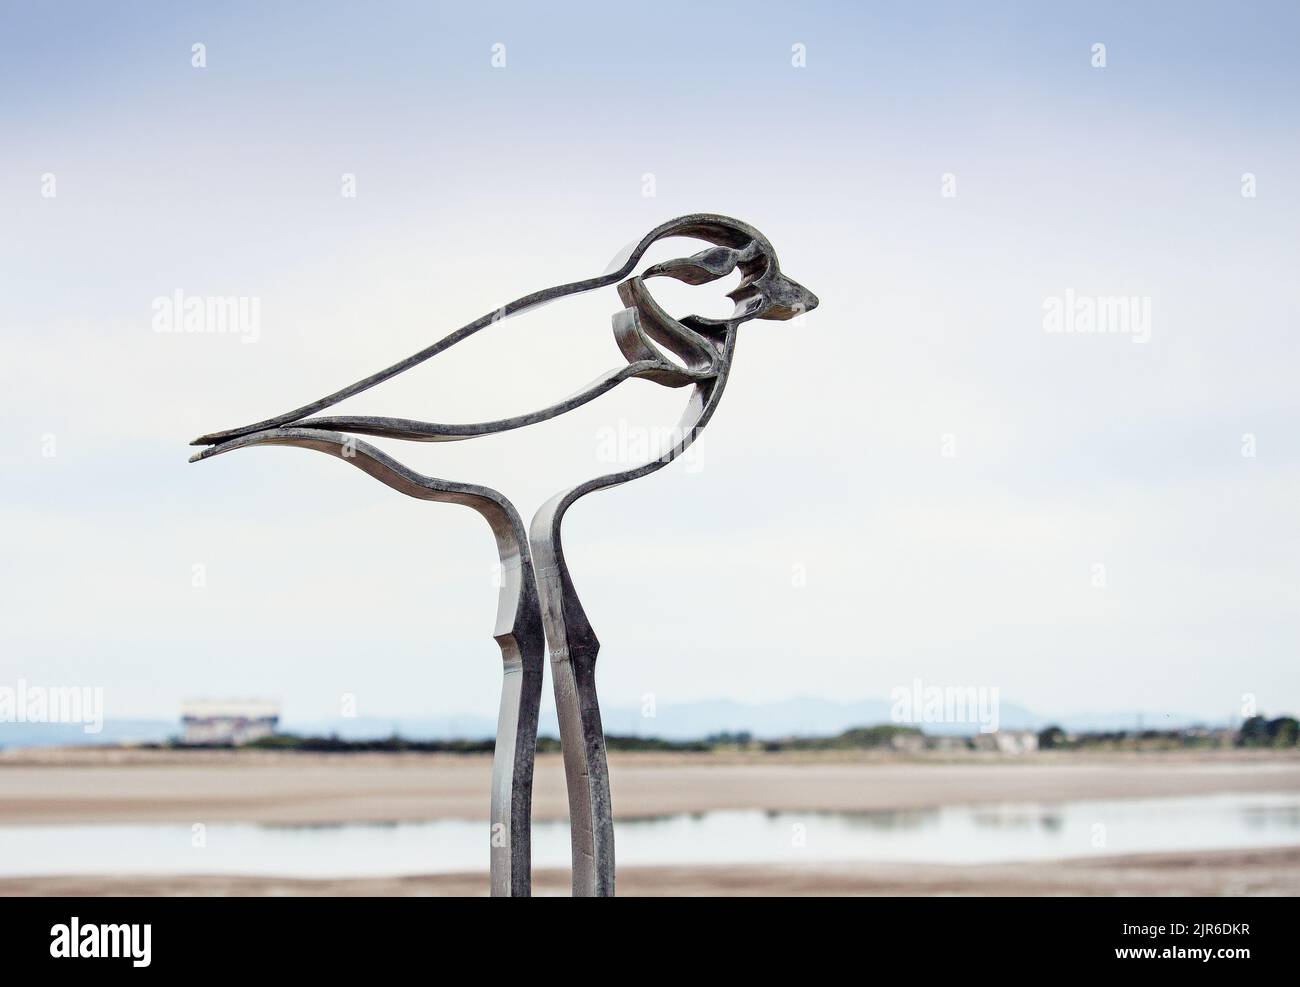 The concept of a distant shore, with a manufactured metallic bird in the foreground Stock Photo